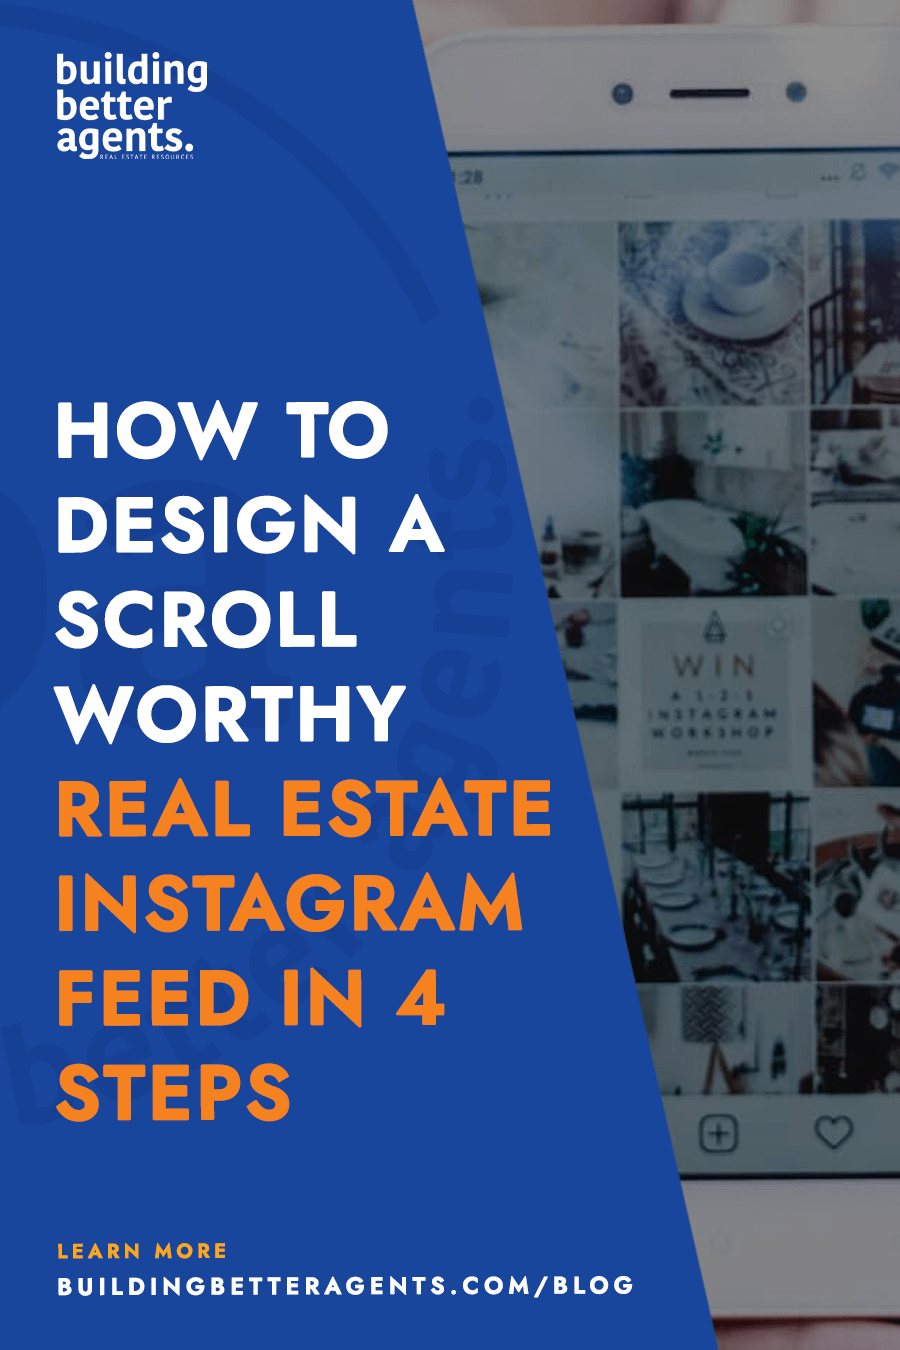 How to Design a Scroll Worthy Real Estate Instagram Feed in 4 Steps